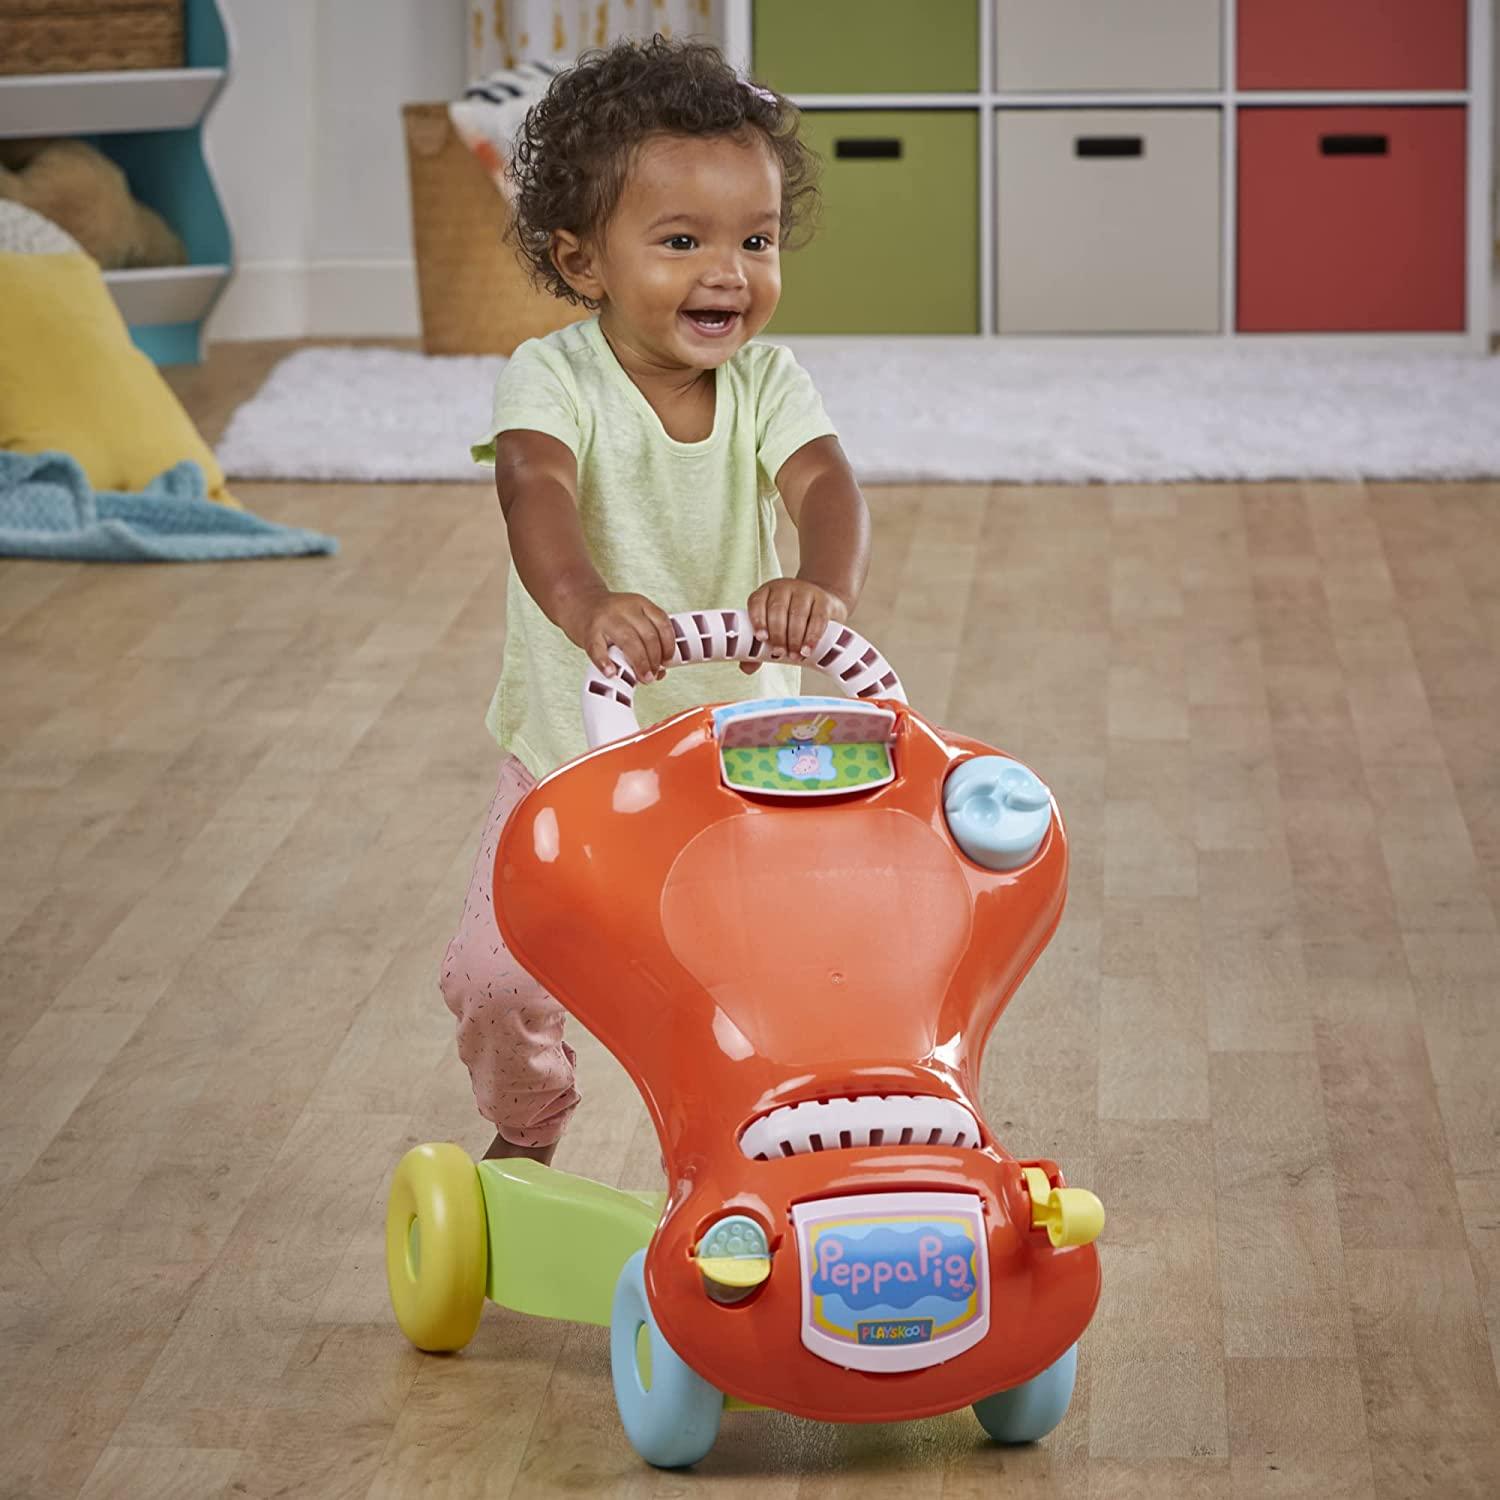 Playskool Step Start Walk 'n Ride Peppa Pig Active 2-in-1 Ride-On and Walker Toy for Toddlers and Babies 9 Months and Up - FunCorp India